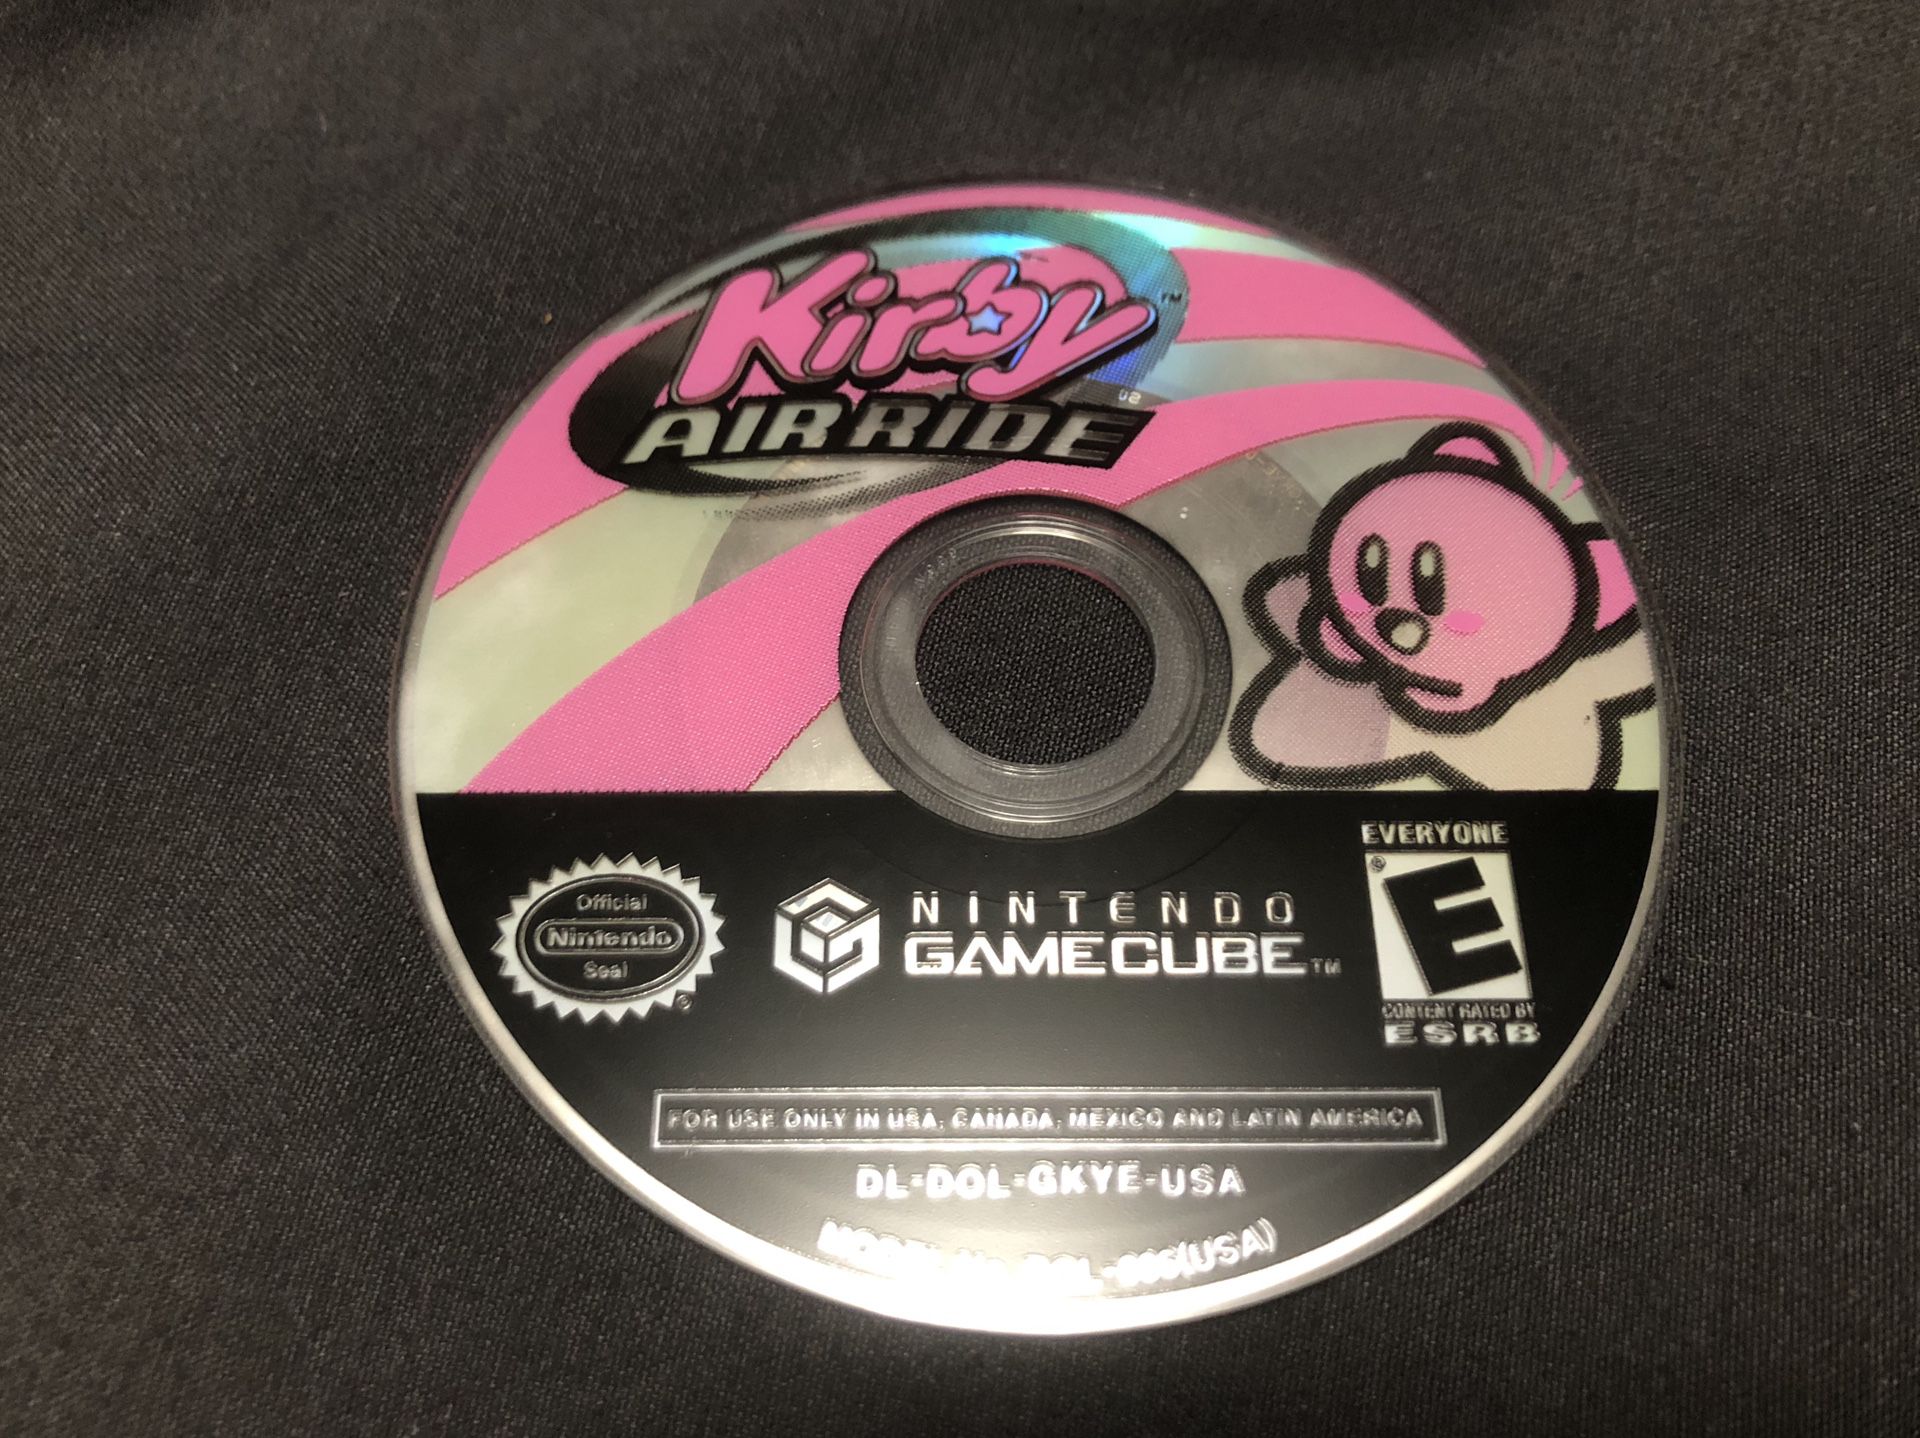 Kirby Air Ride for Nintendo GameCube